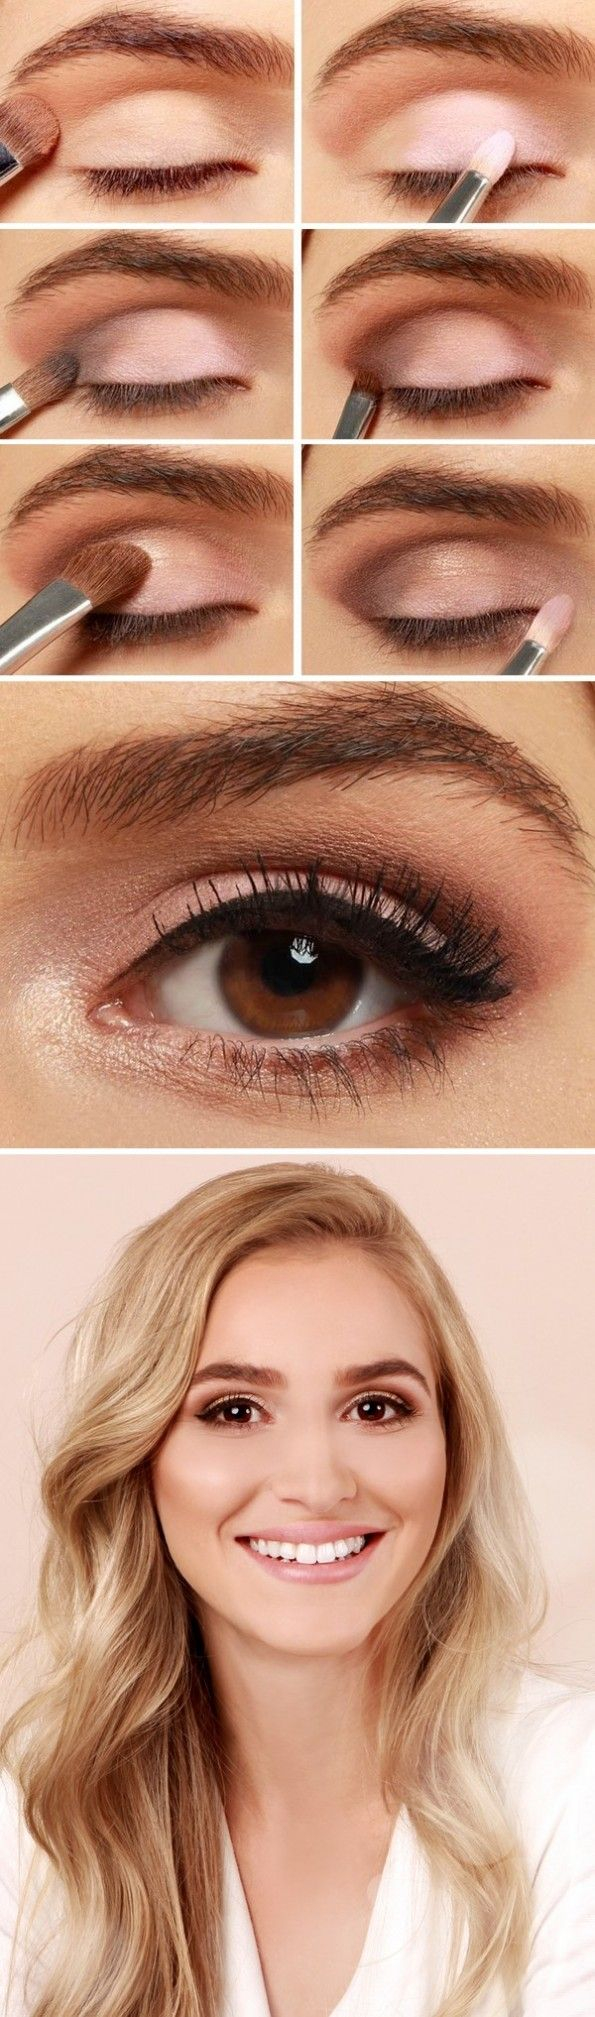 Prom Makeup Ideas For Brown Eyes 27 Pretty Makeup Tutorials For Brown Eyes Styles Weekly